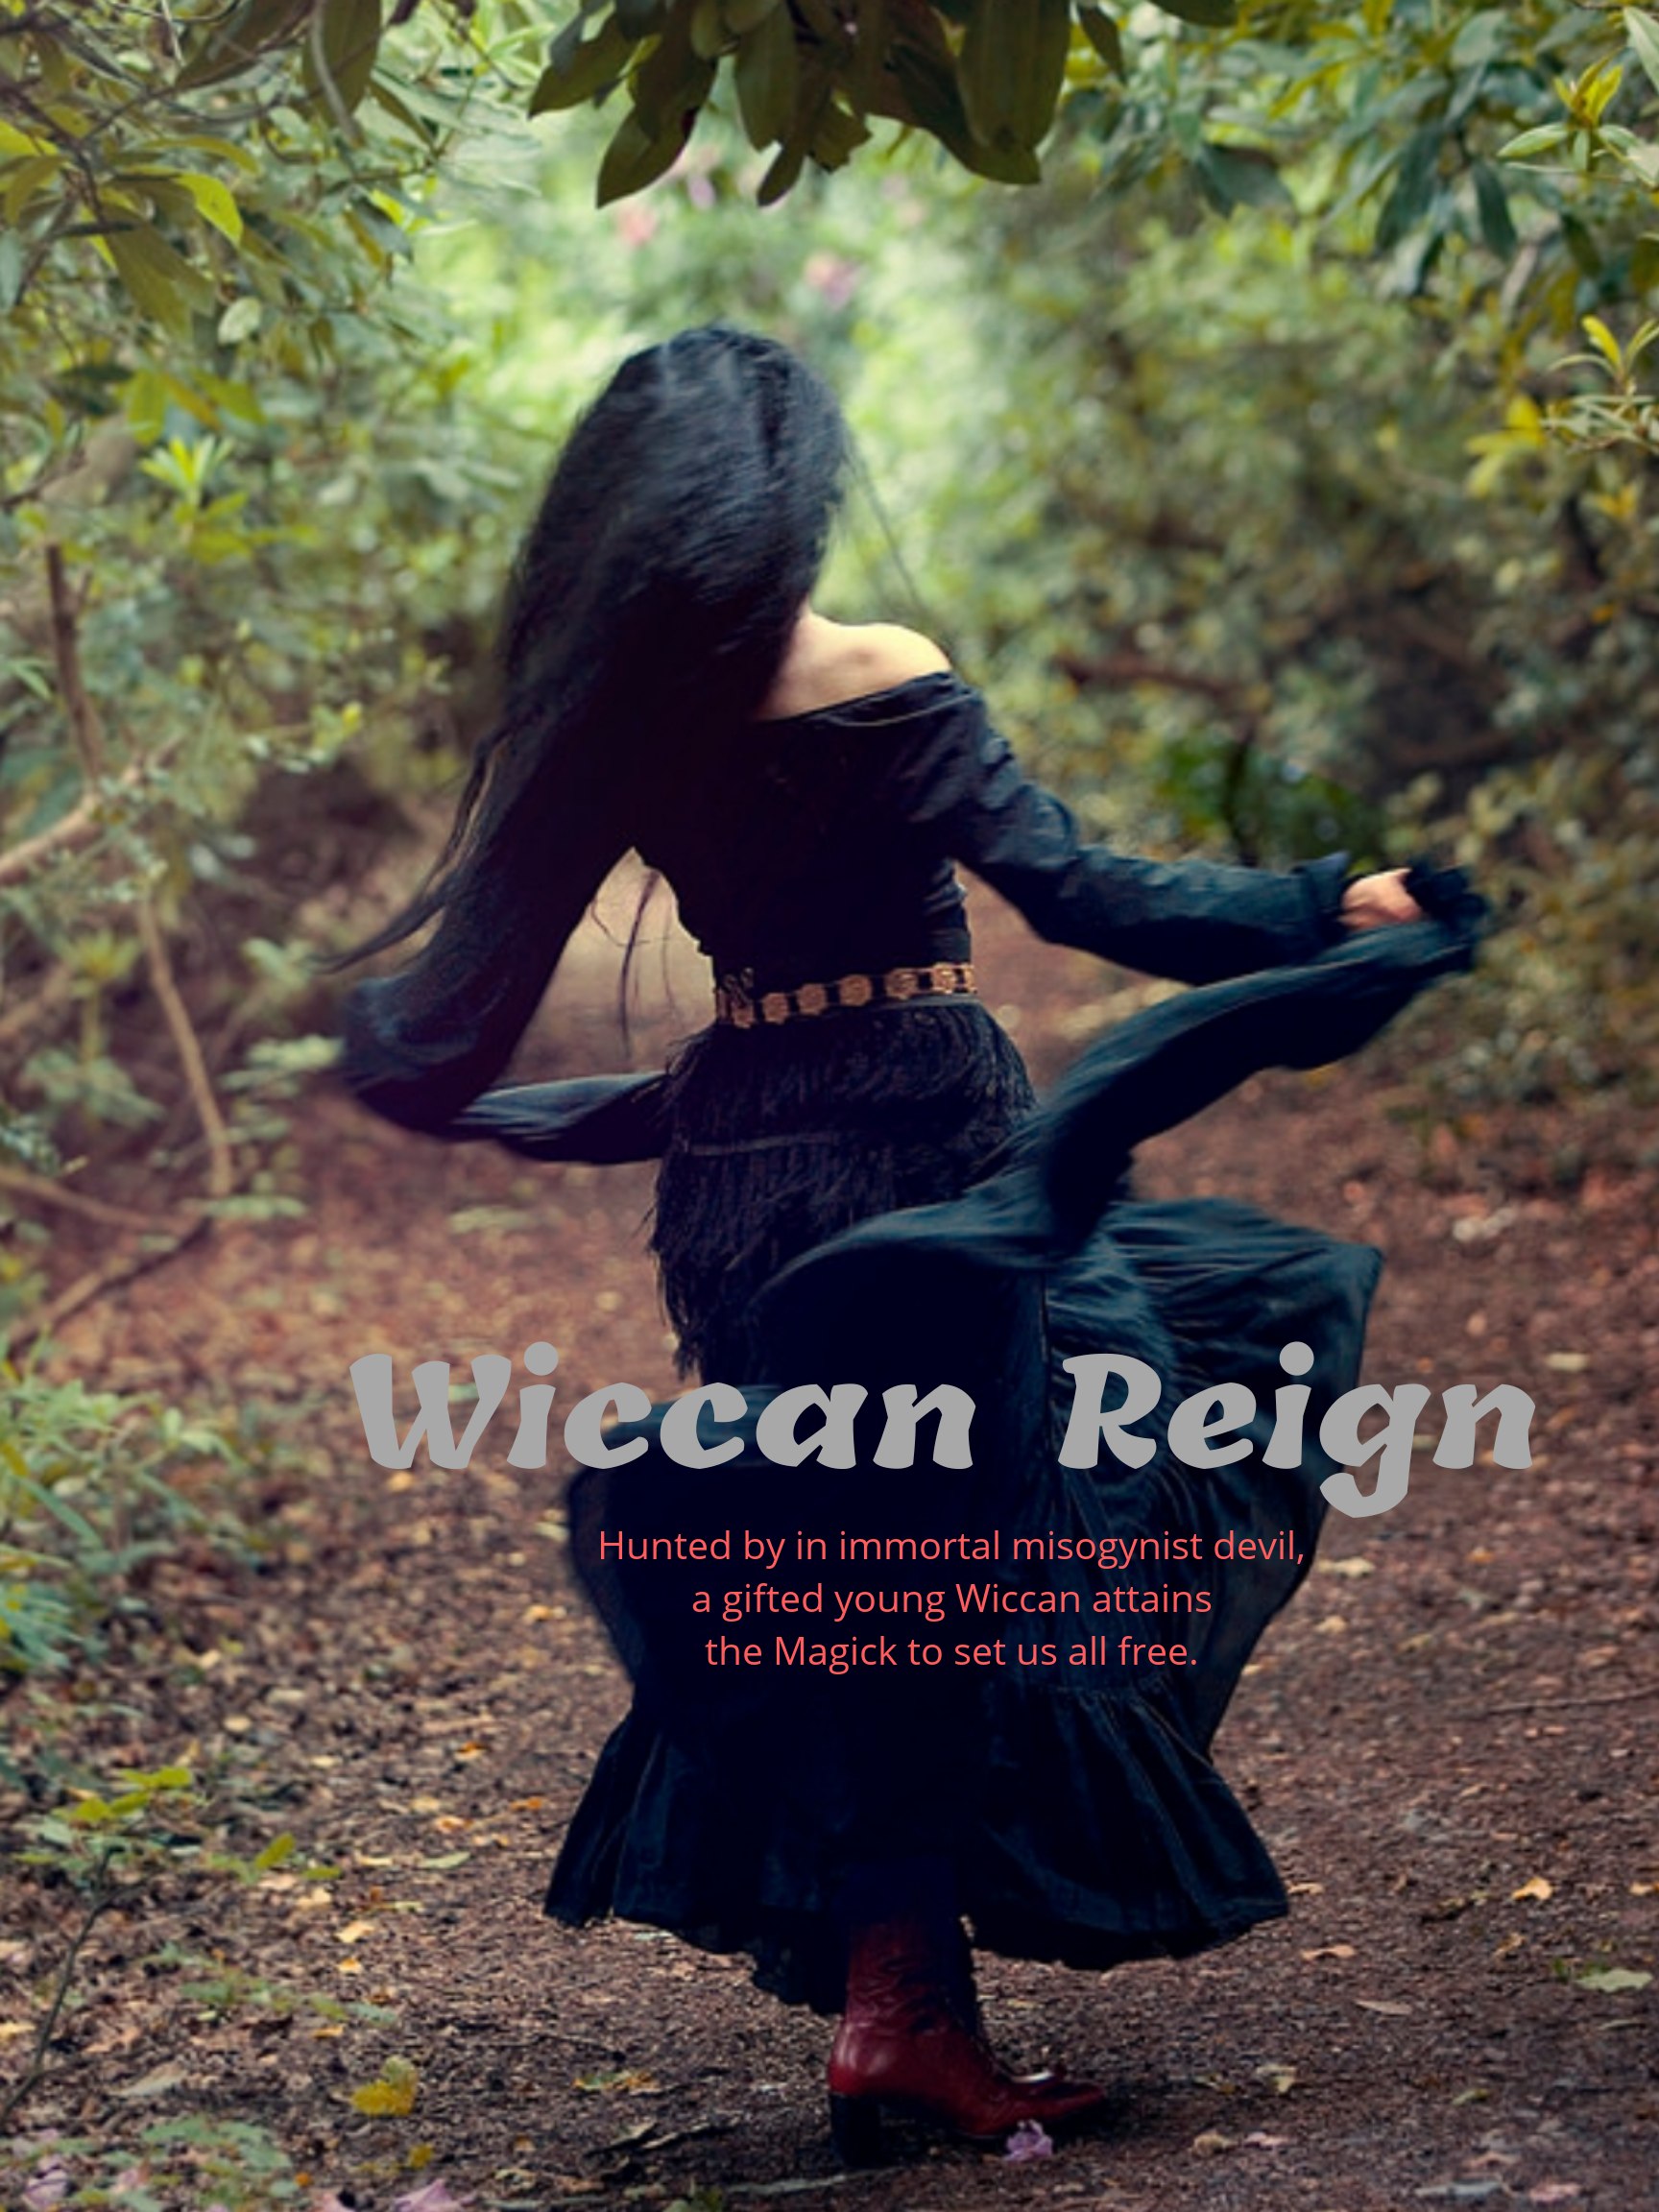 WICCAN REIGN